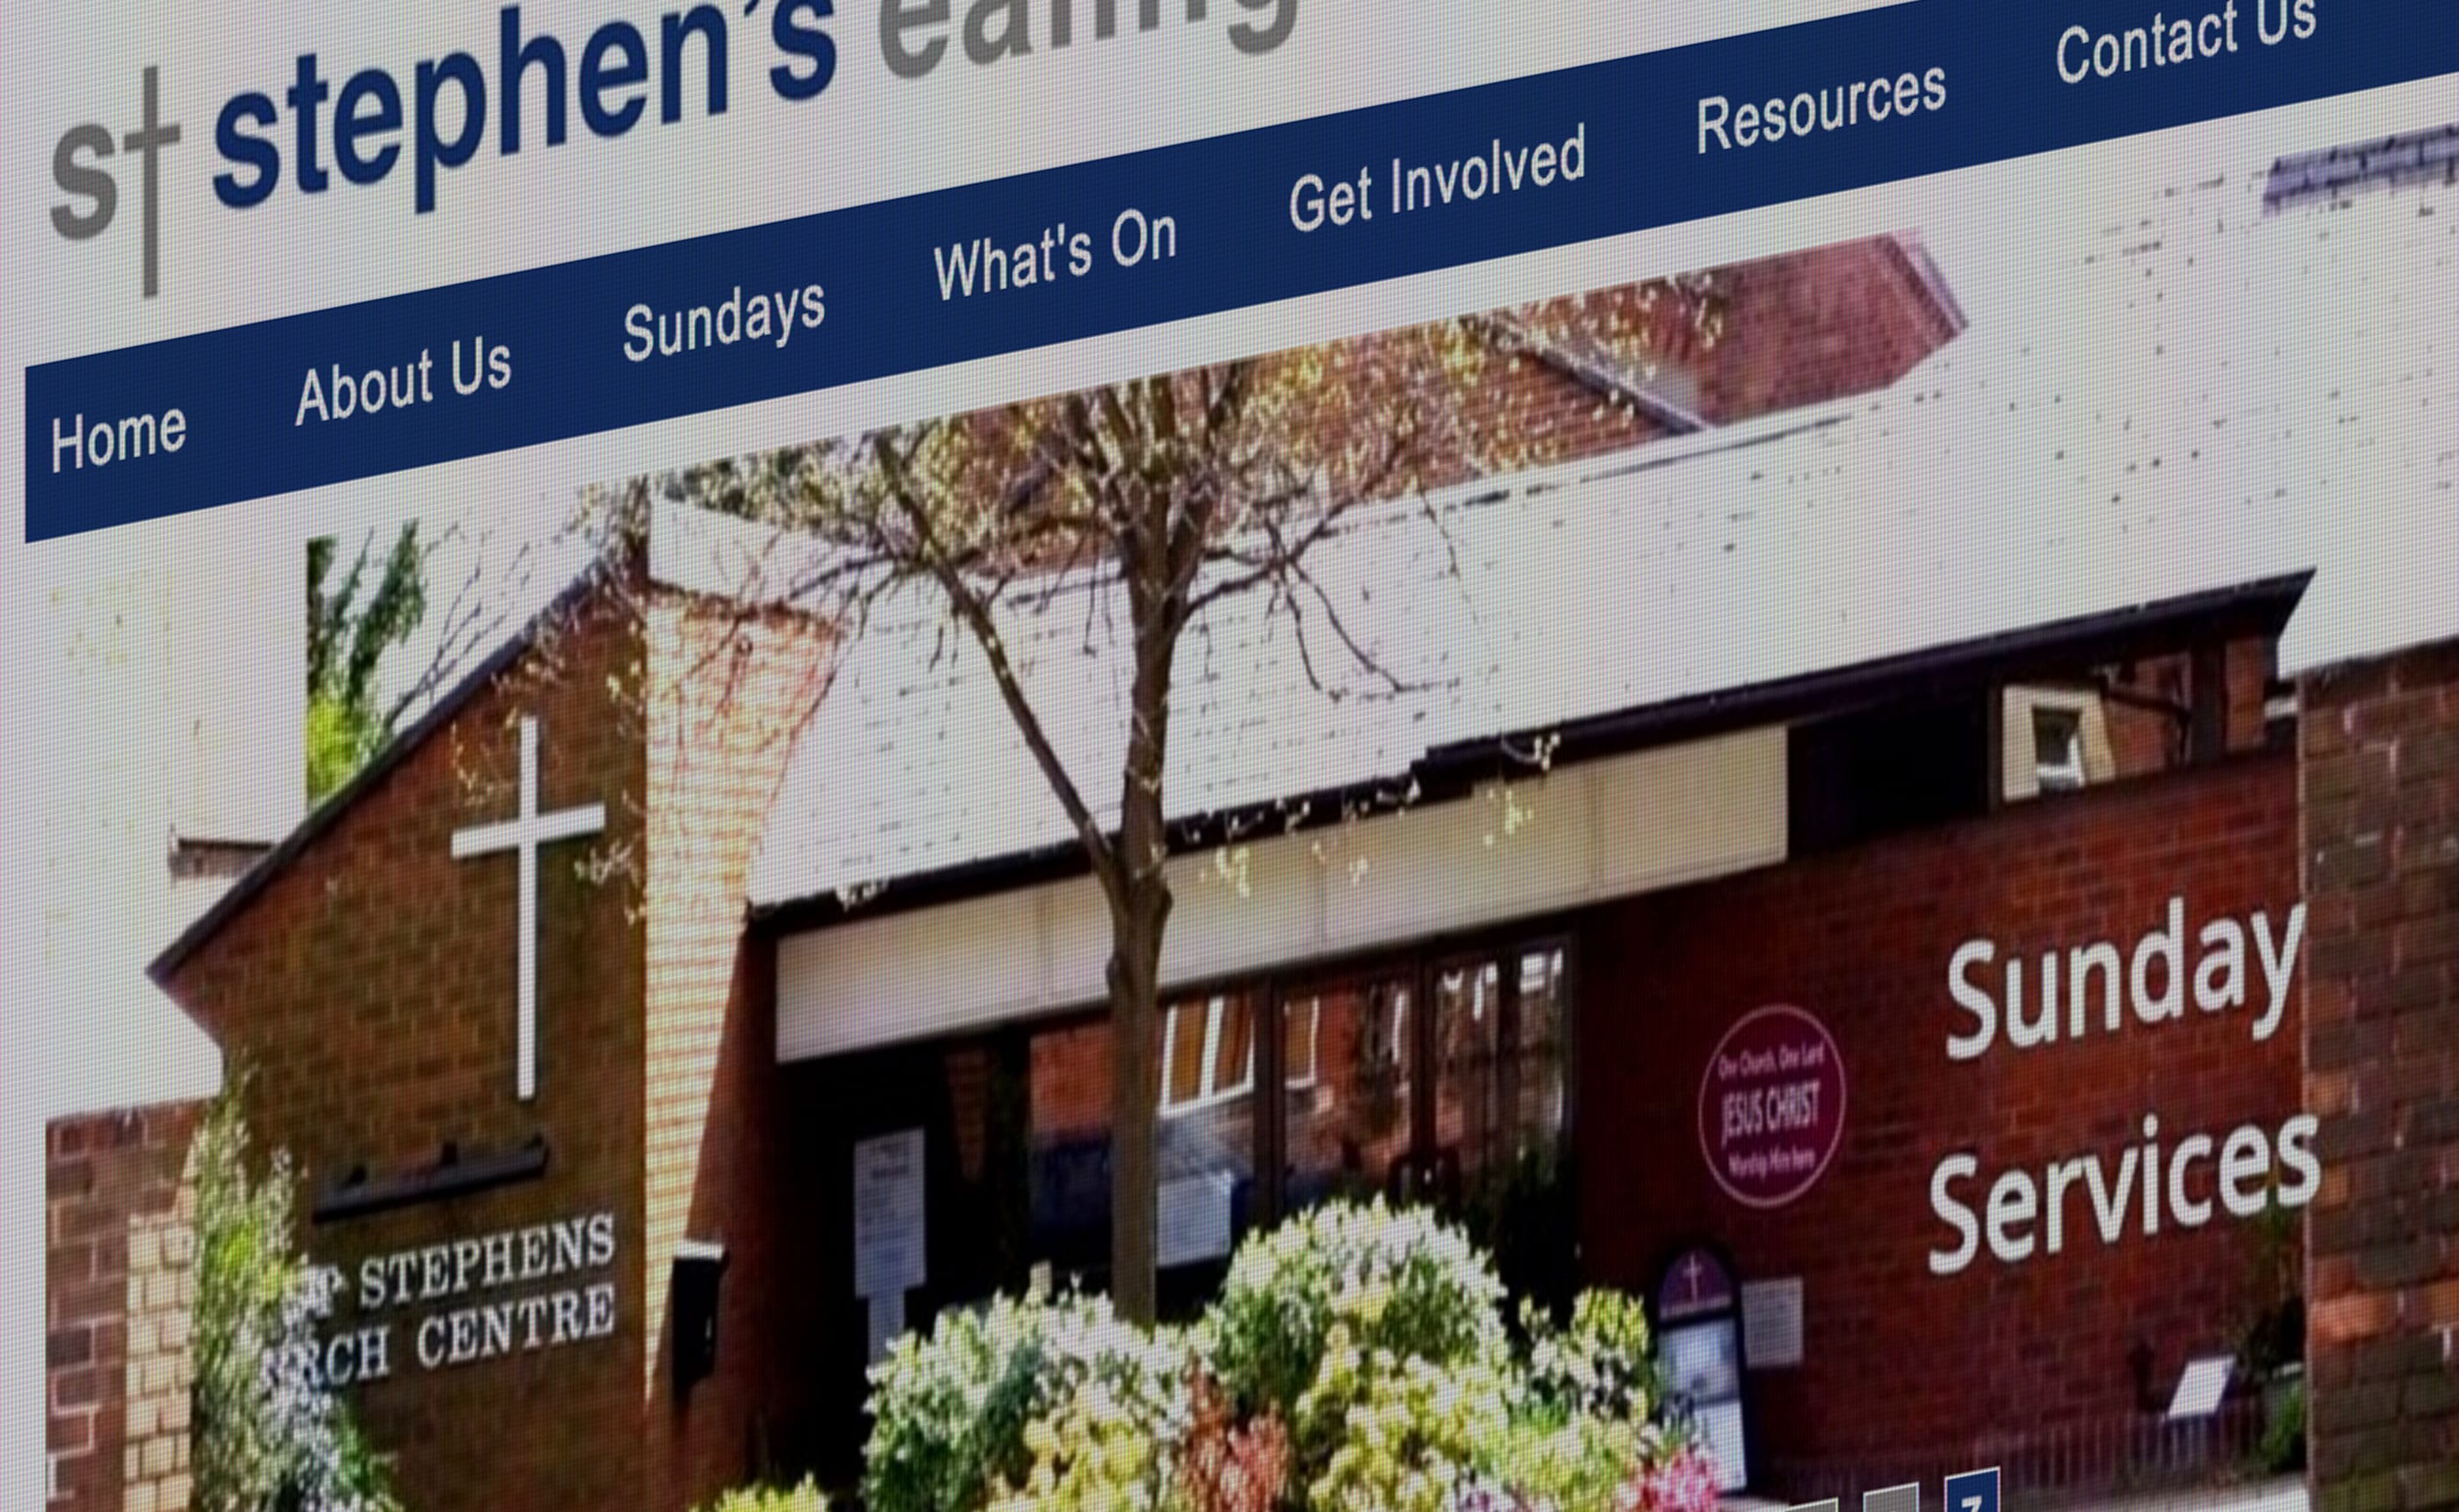 Featured image for “St Stephen’s, Ealing”